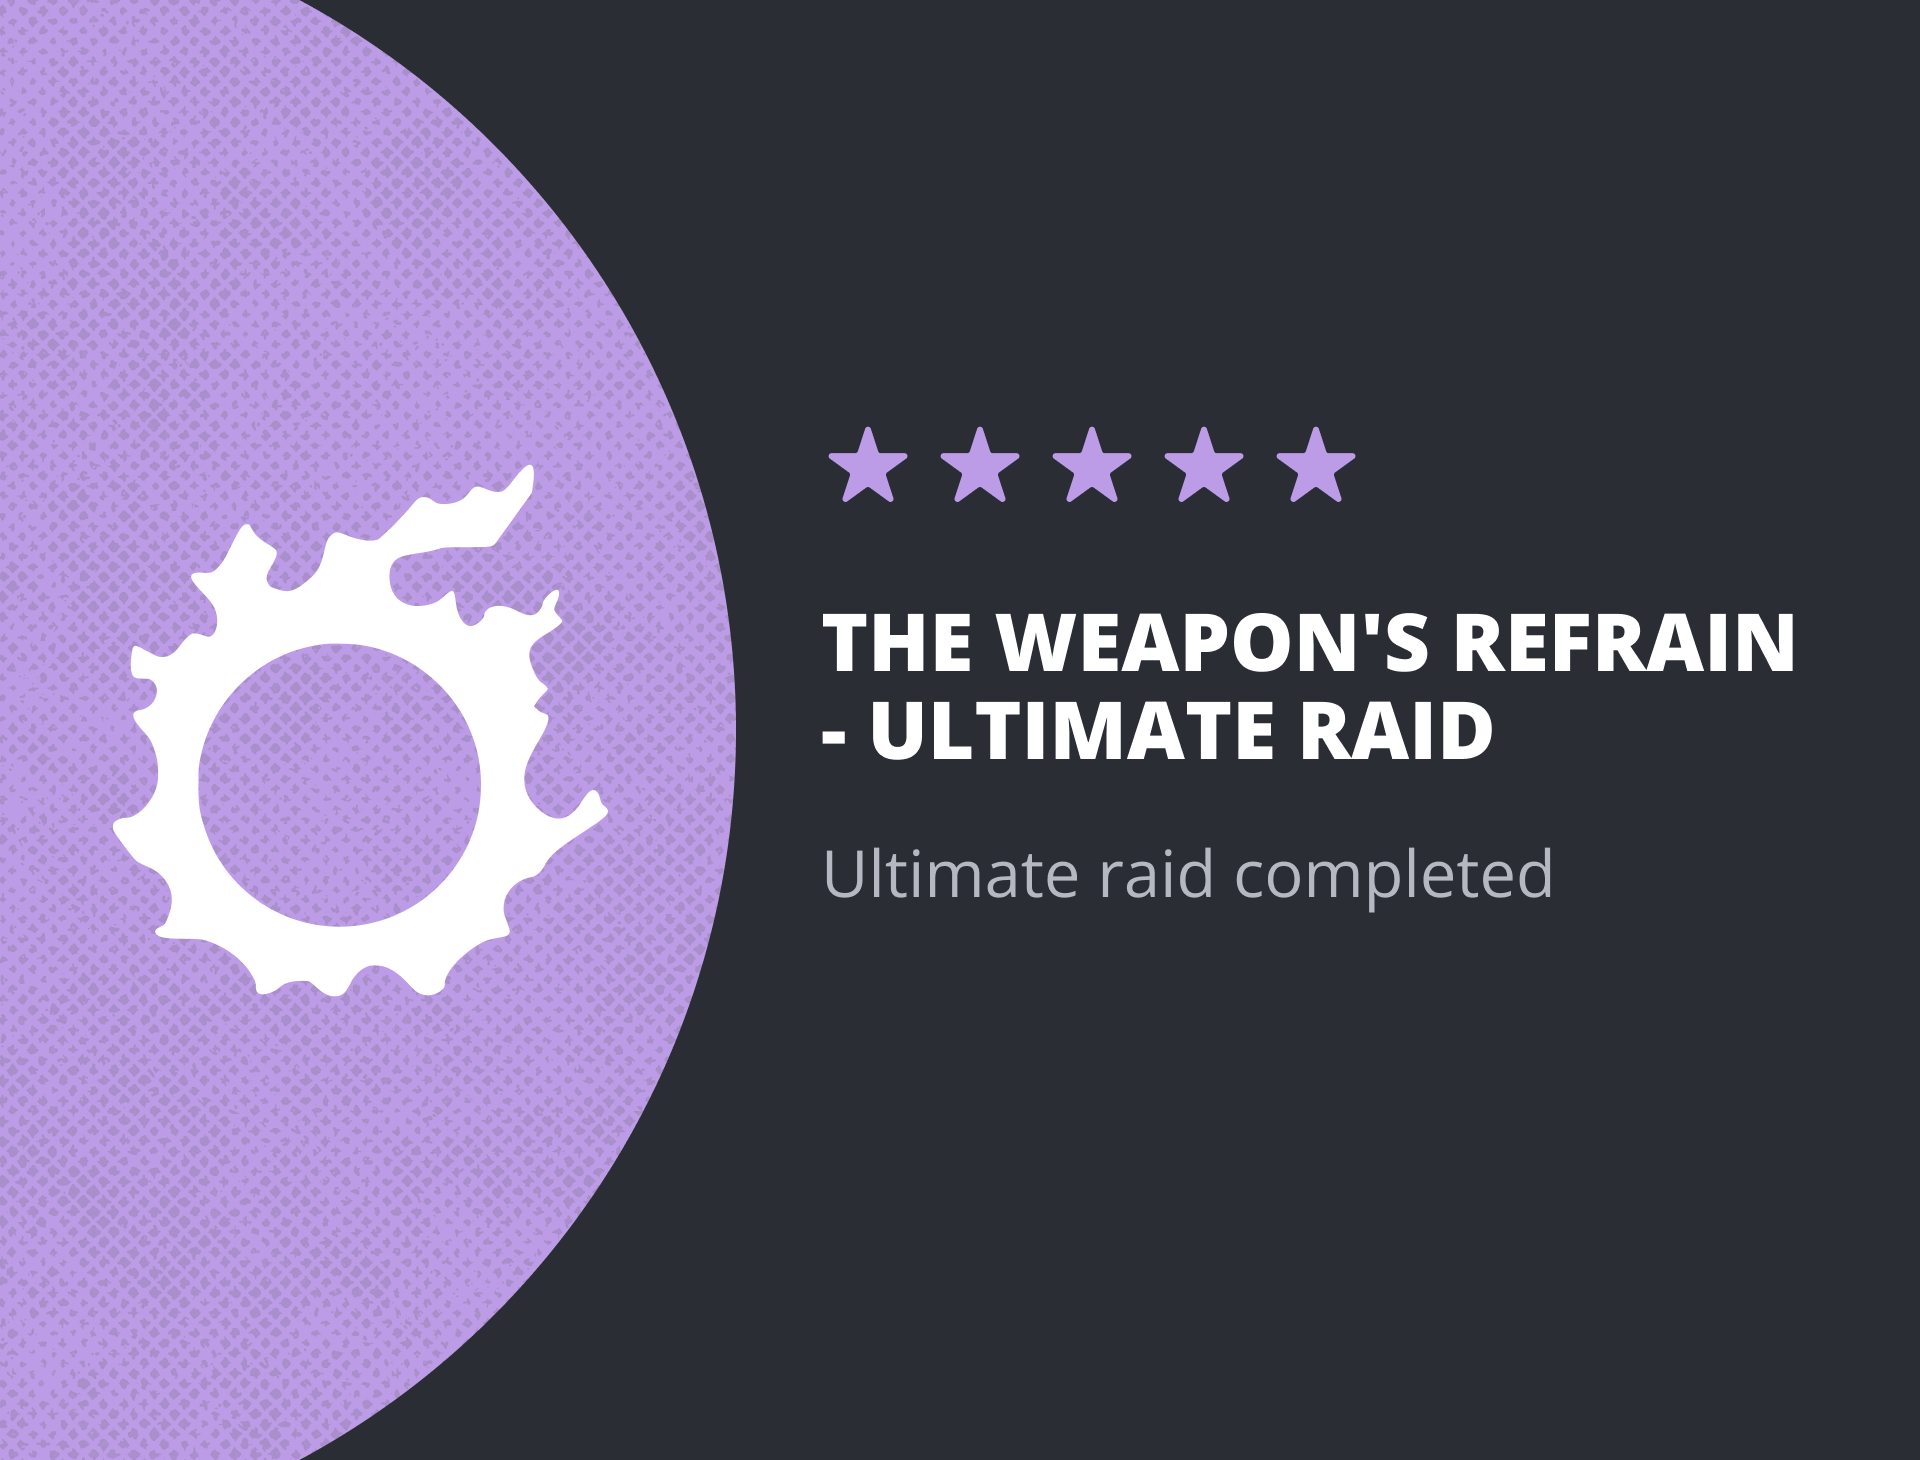 The Weapon's Refrain - Ultimate Raid